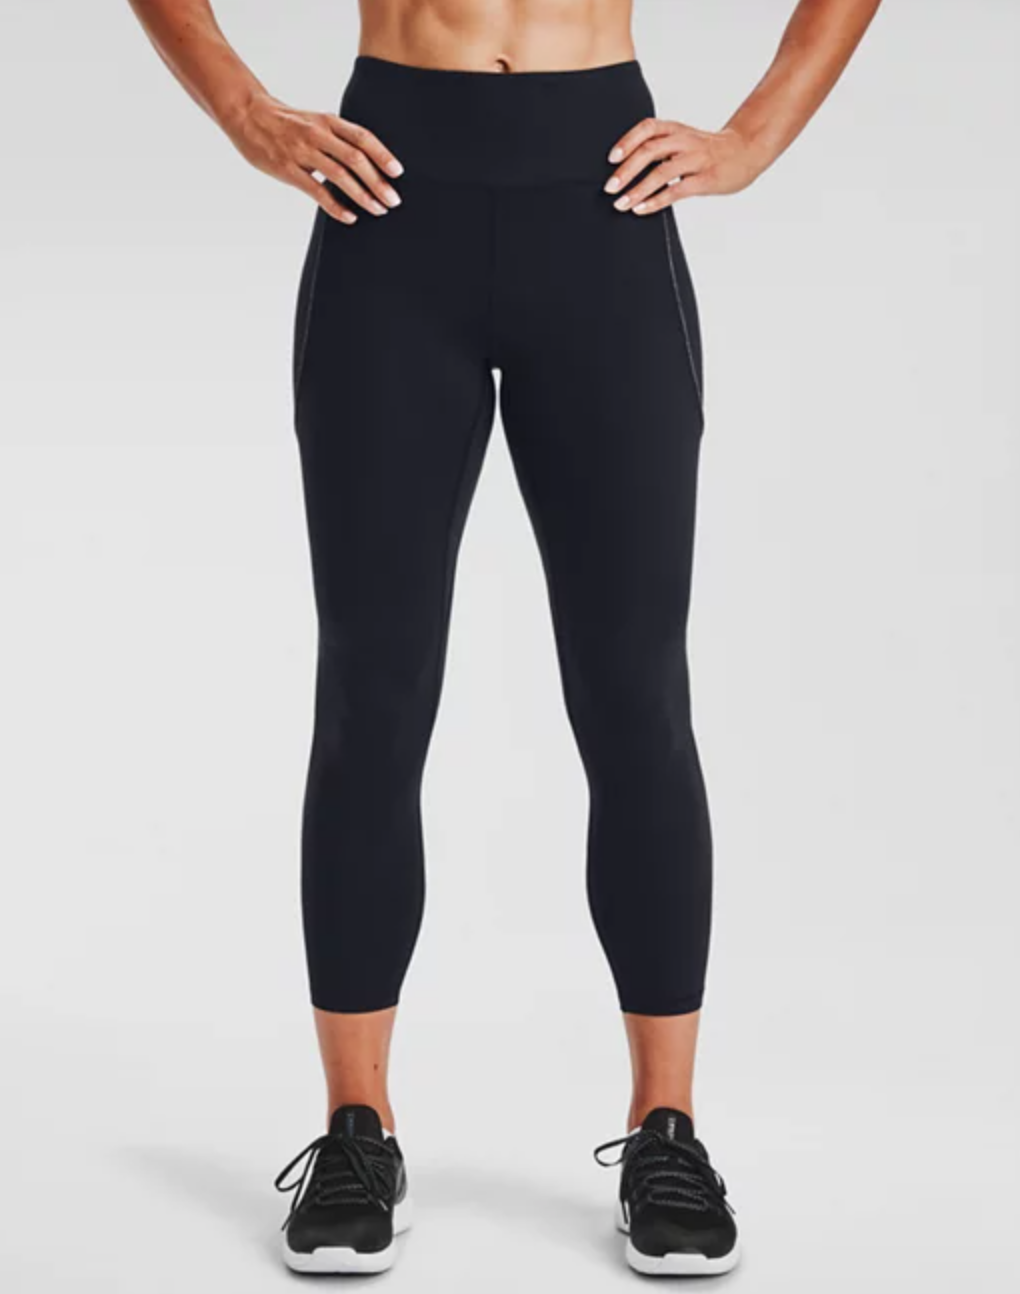 High Waist, Stretchy and Recovery Sports Leggings Grey Shop Now | ZEFASH